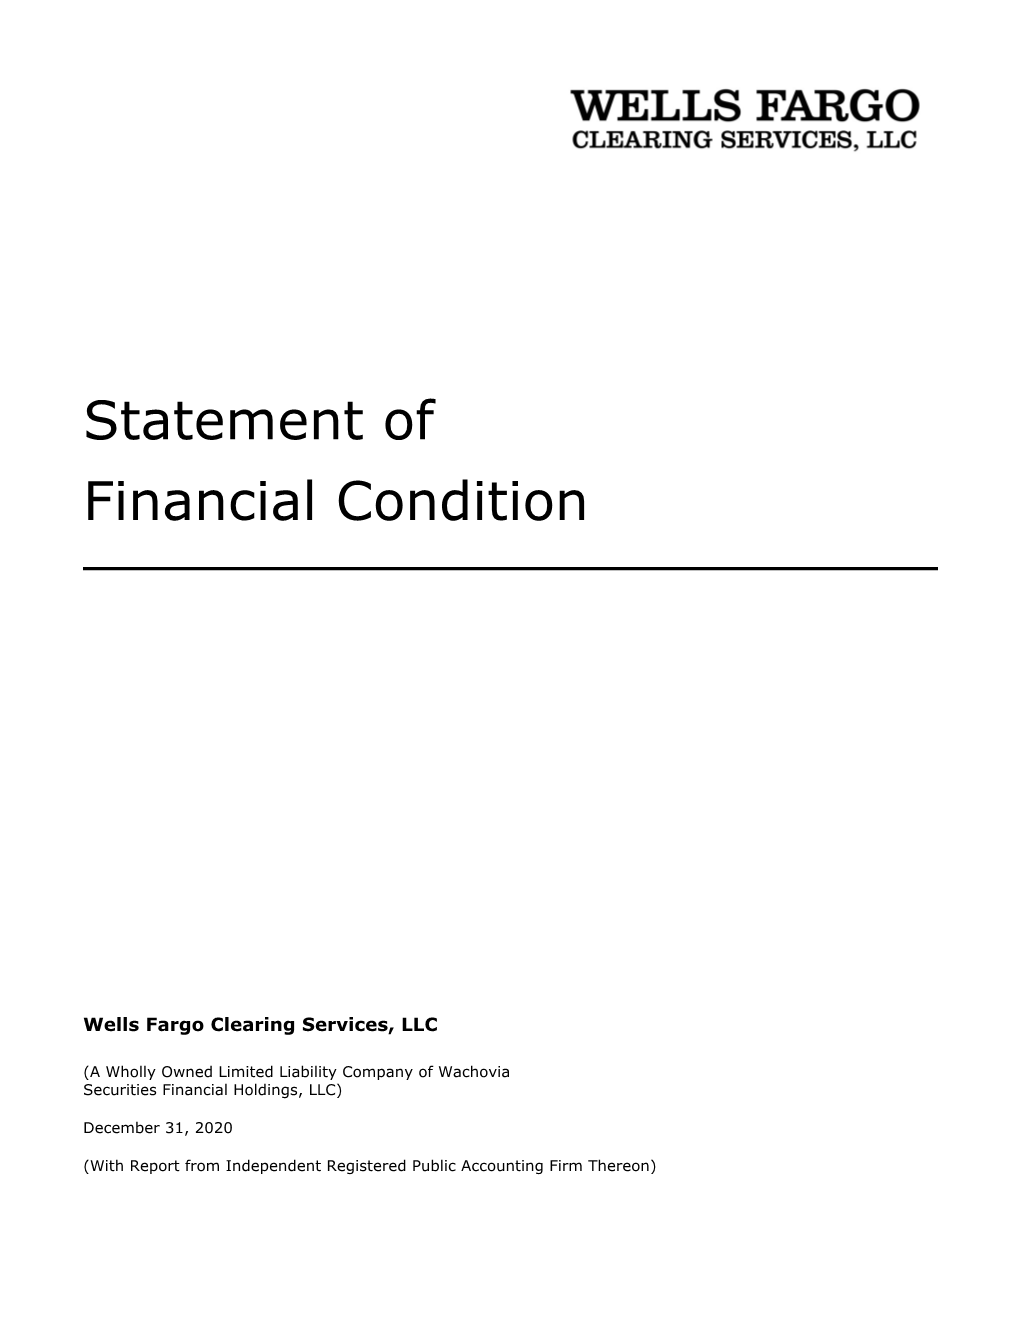 Statement of Financial Condition